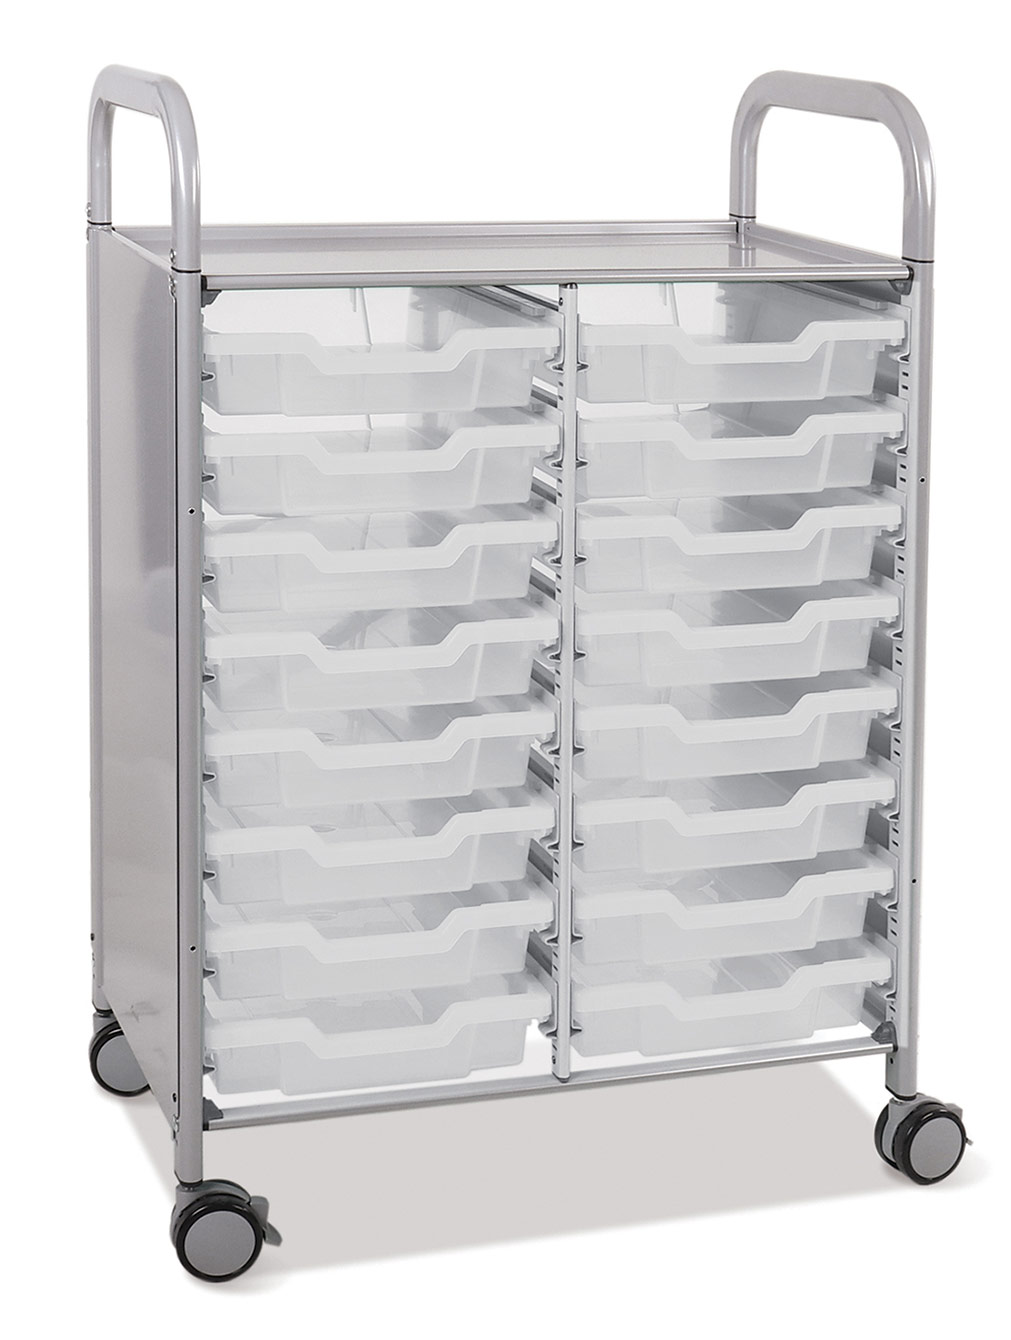 16 Double Shield Plus - Shallow Callero Trays Trolley Gratnells